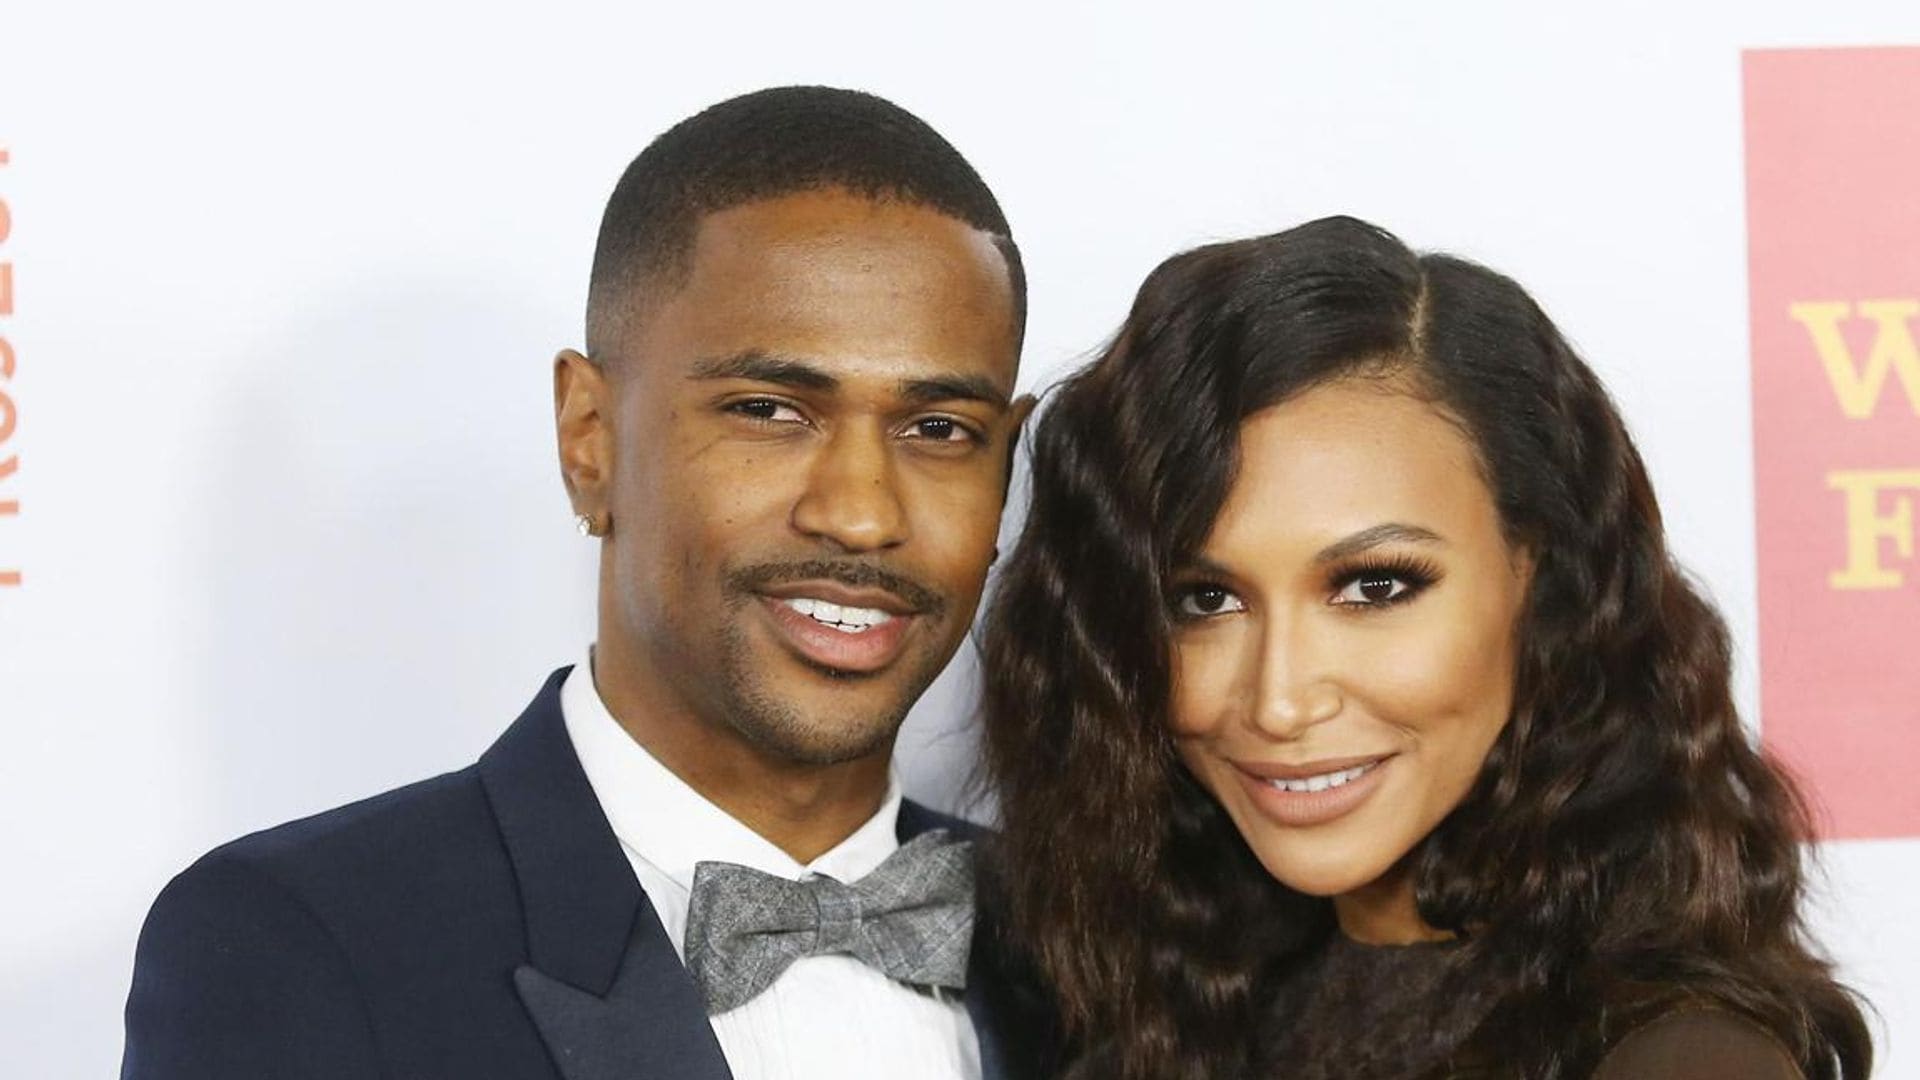 Big Sean says Naya Rivera liked his song IDFWU, ‘it wasn’t a diss to her’